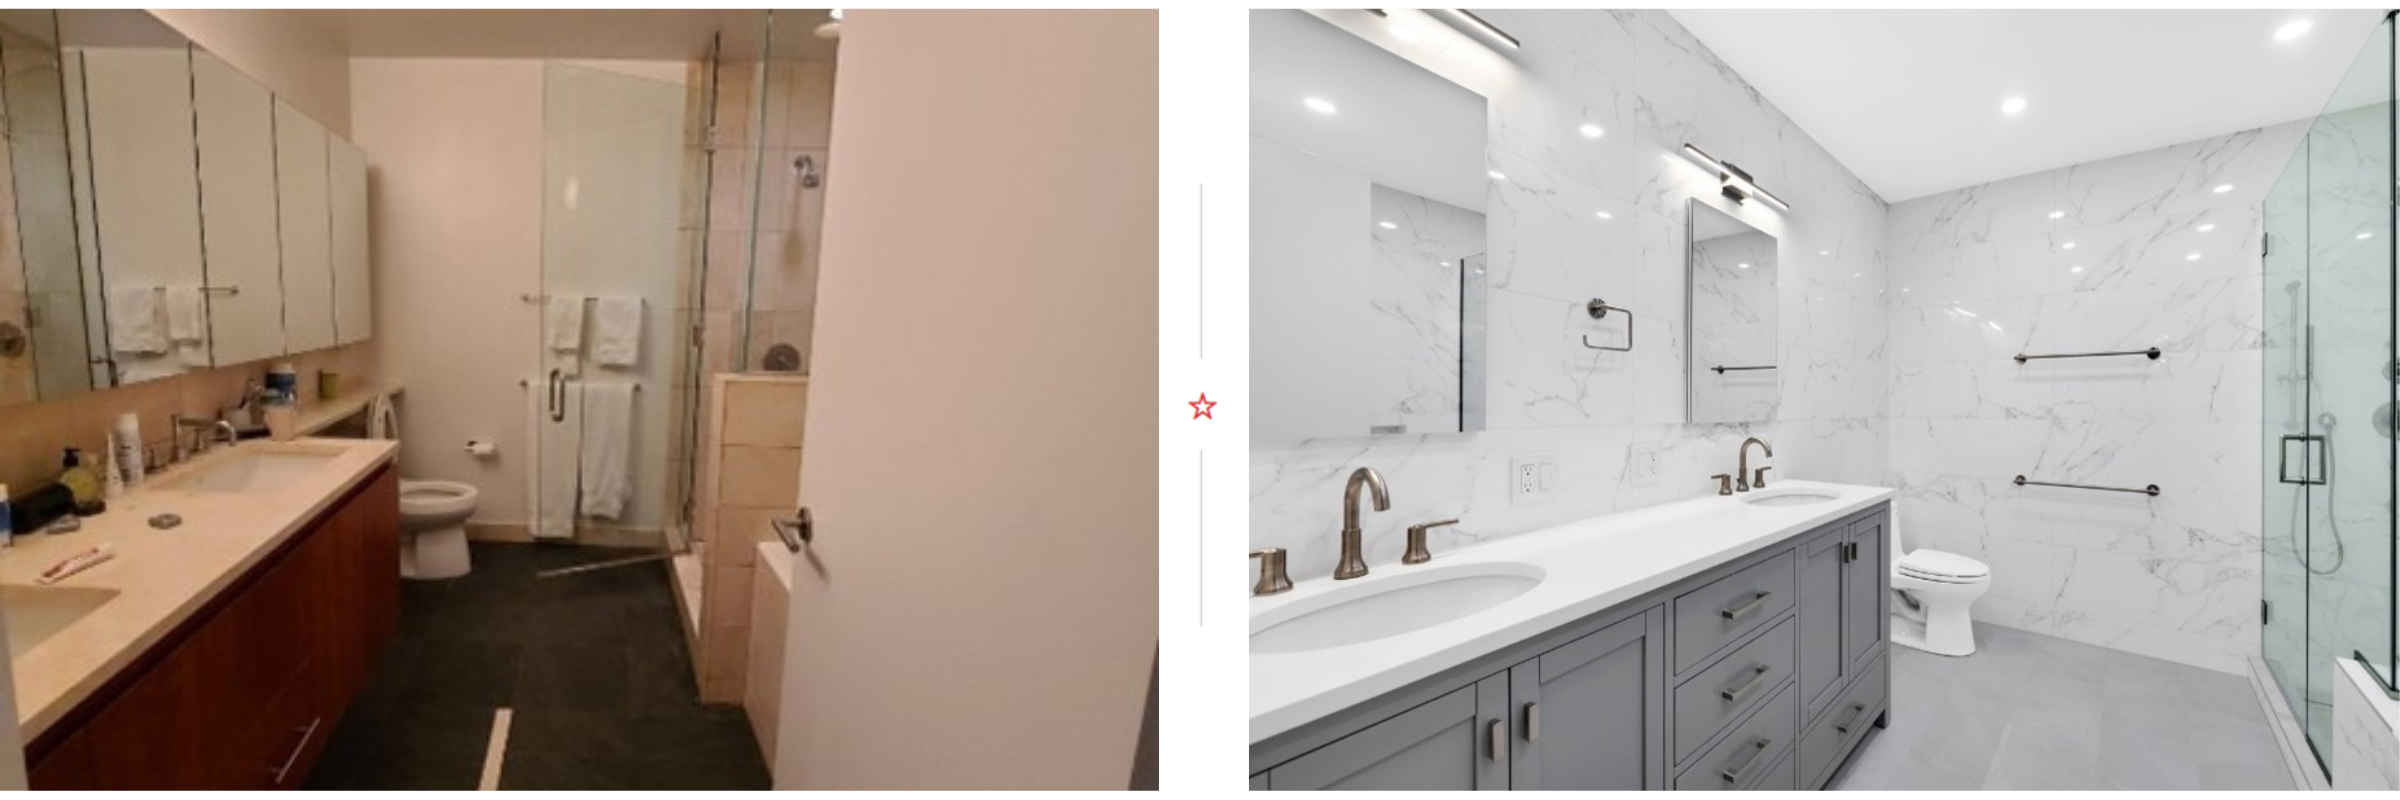 A before and after of the bathroom. The before image shows dark flooring and  old, outdated furnishings. The after photo shows the updated light and bright bathroom with whites and silvers.